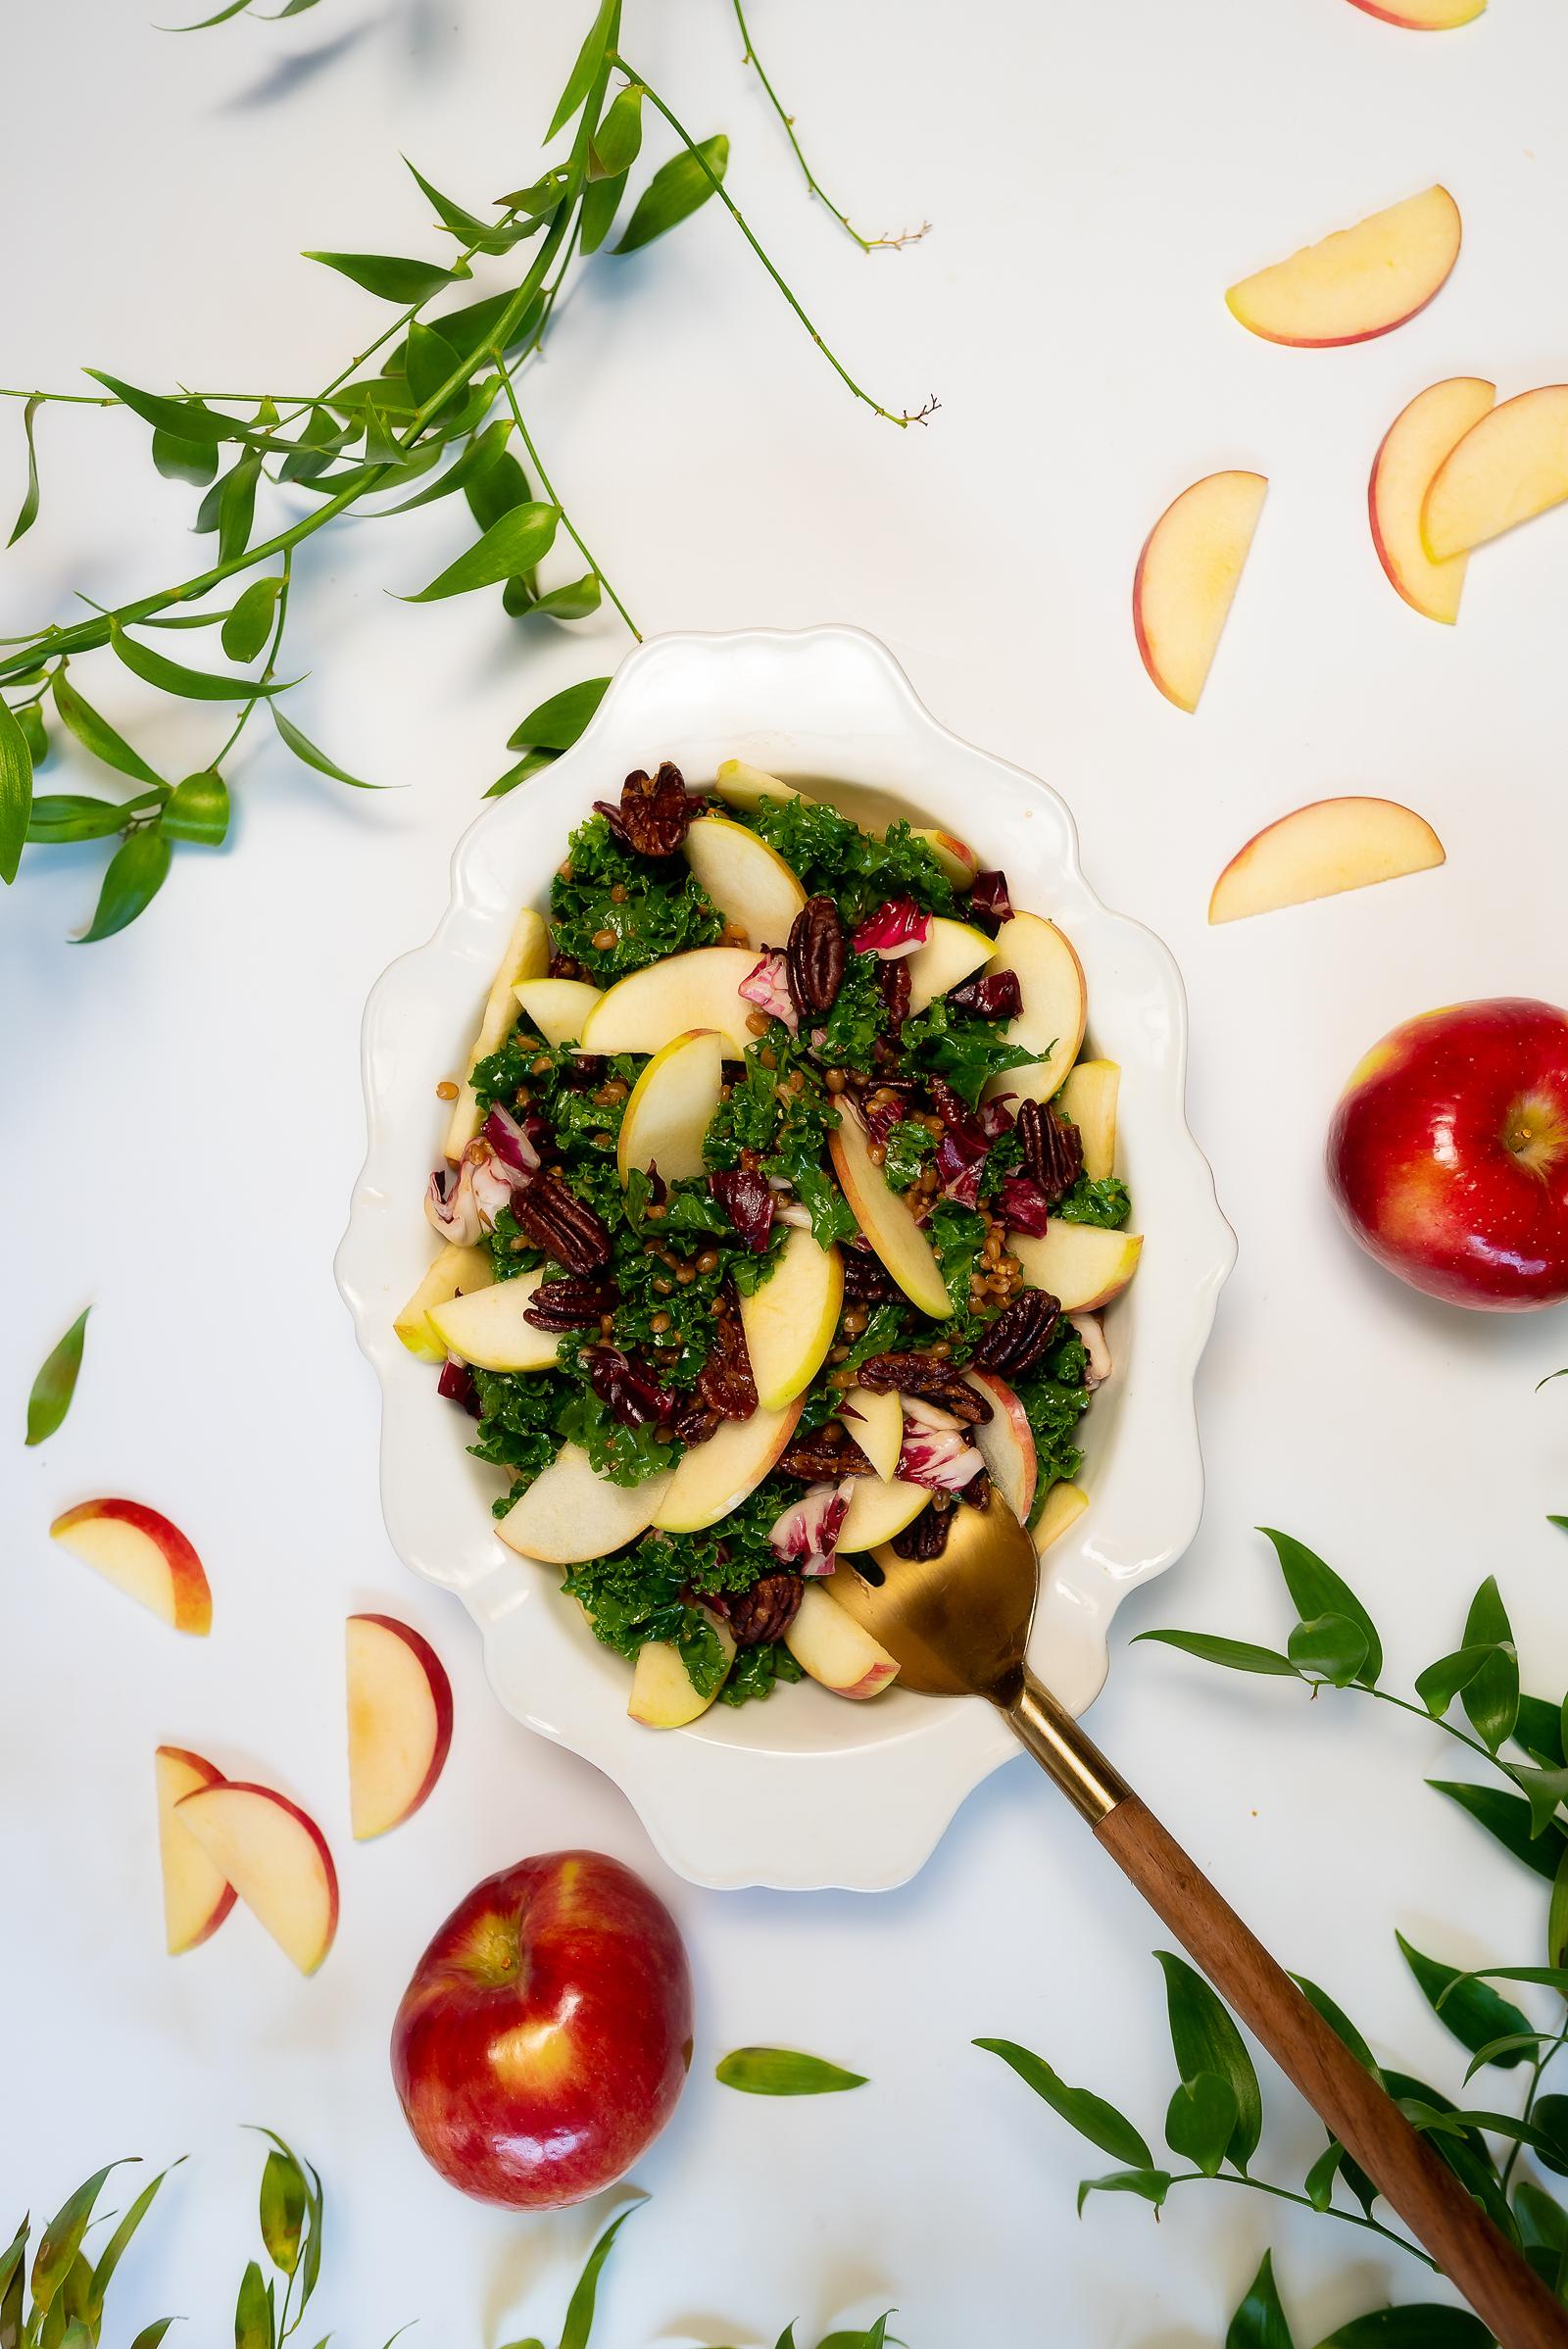 Stemilt Rave Apple Salad with Kale, Roasted Pecans, Wheatberries, Cabbage and an Apple Cider Mustard Vinaigrette Recope